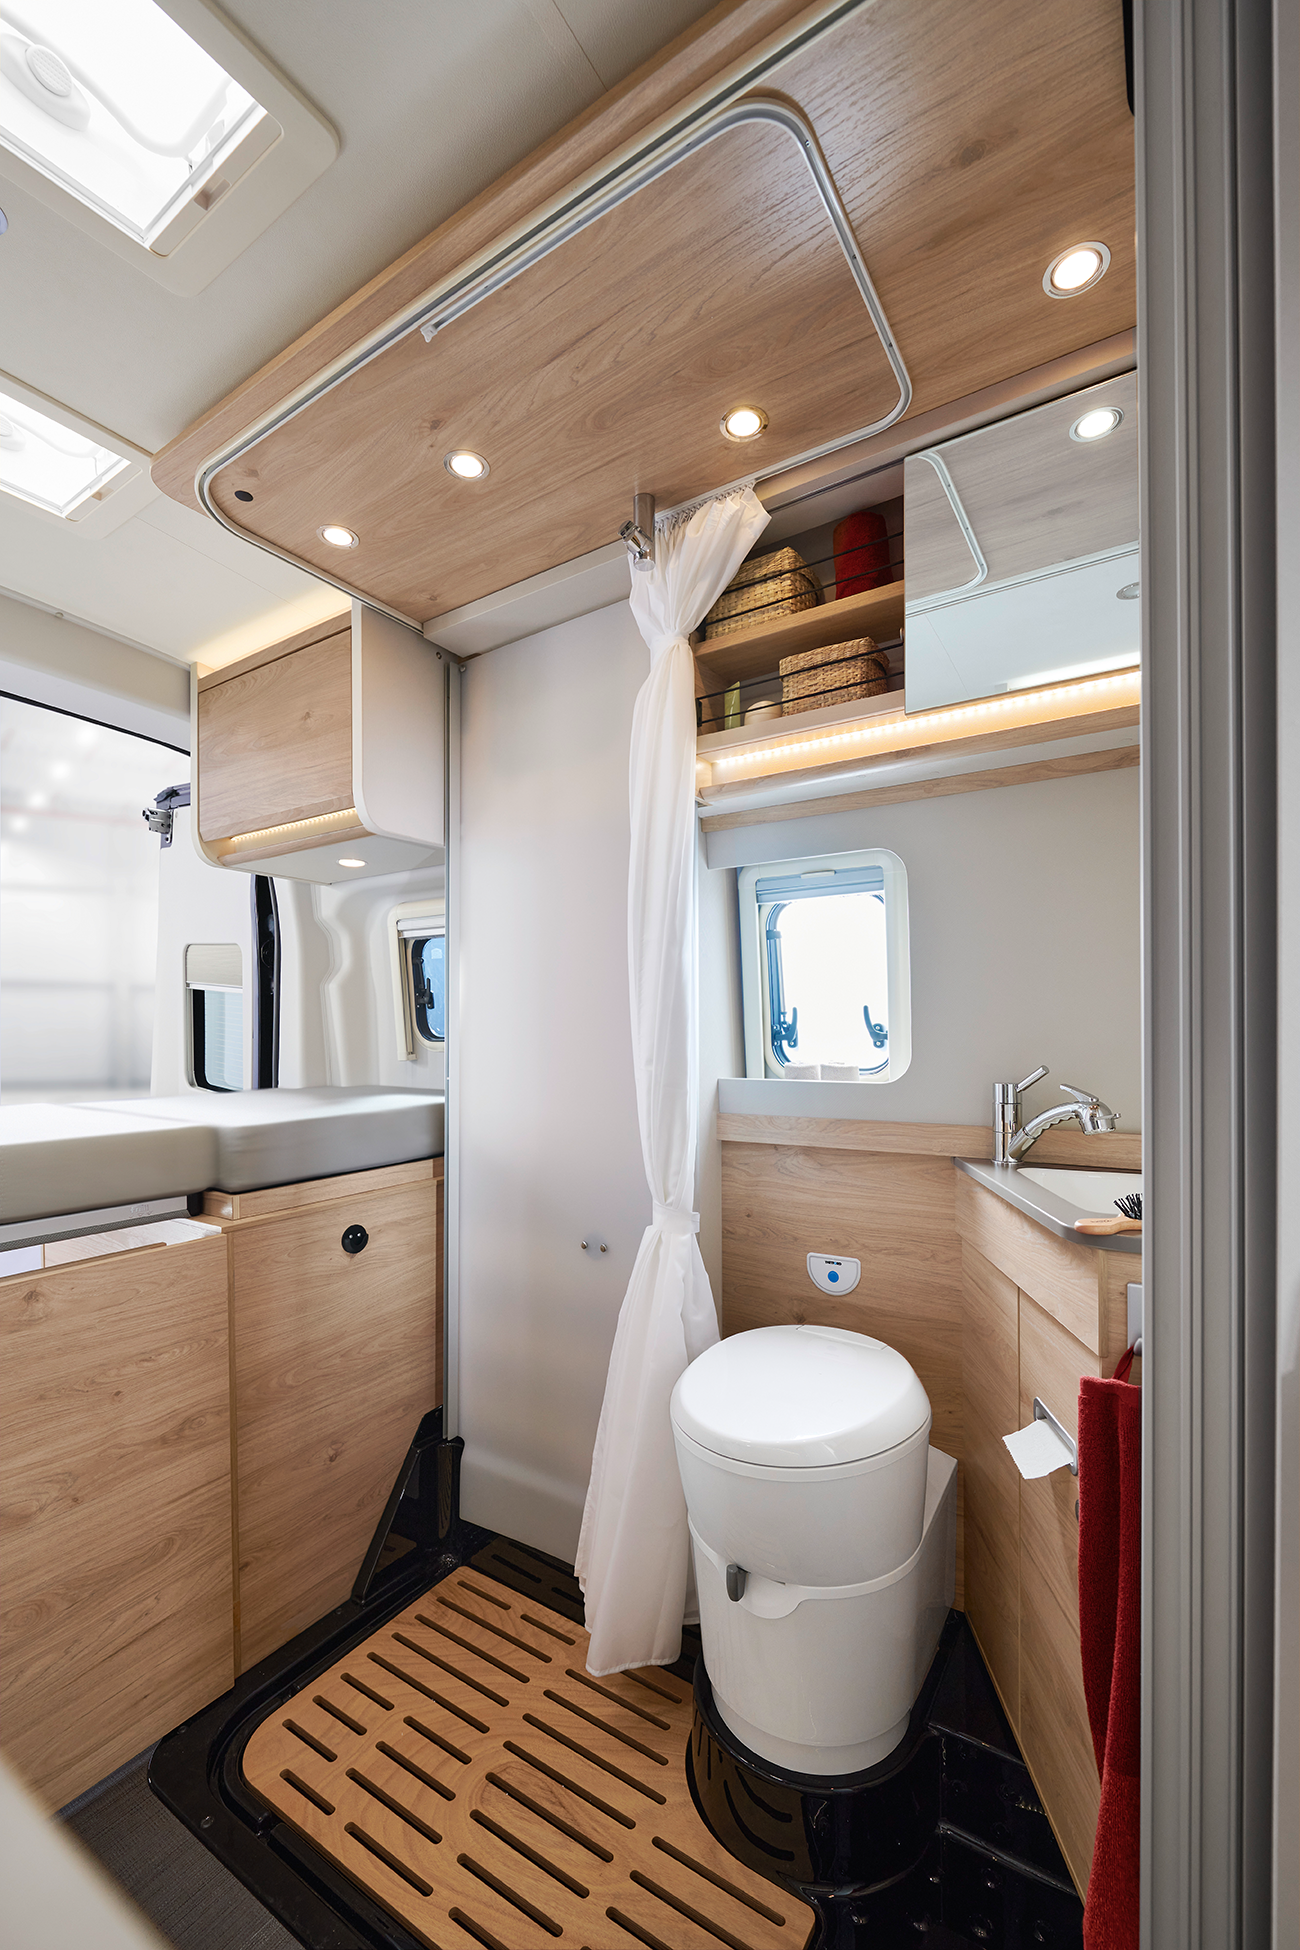 Innovative comfort bathroom with a width of 1.41 m – and sophisticated conversion options.